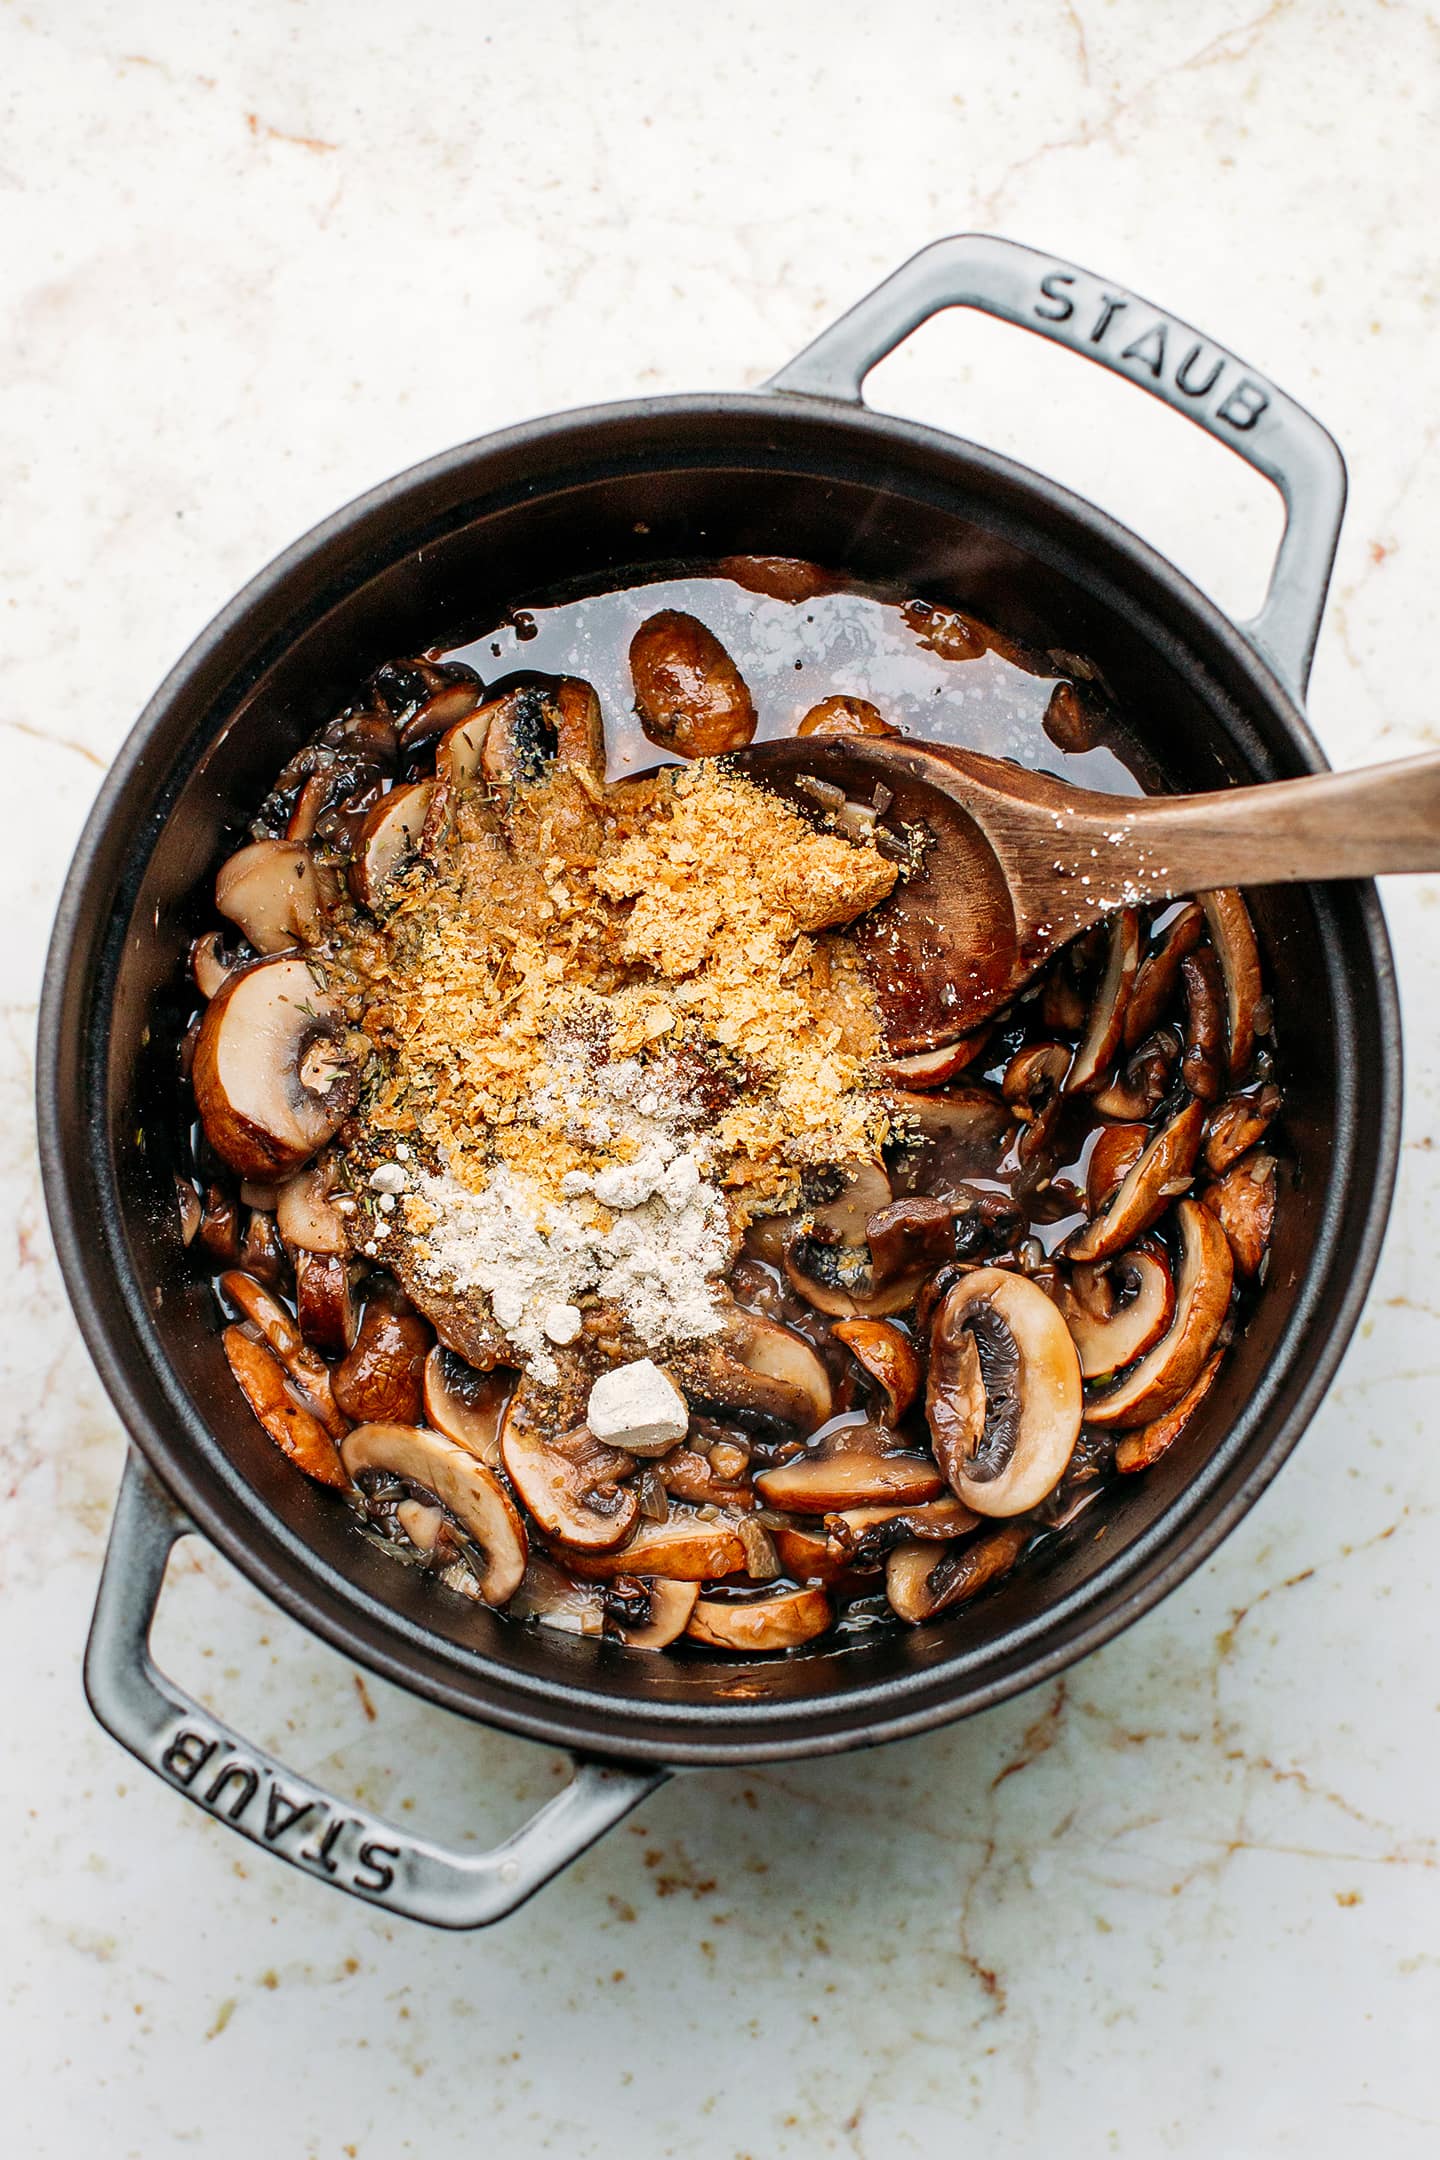 Mushrooms and nutritional yeast in a pot.